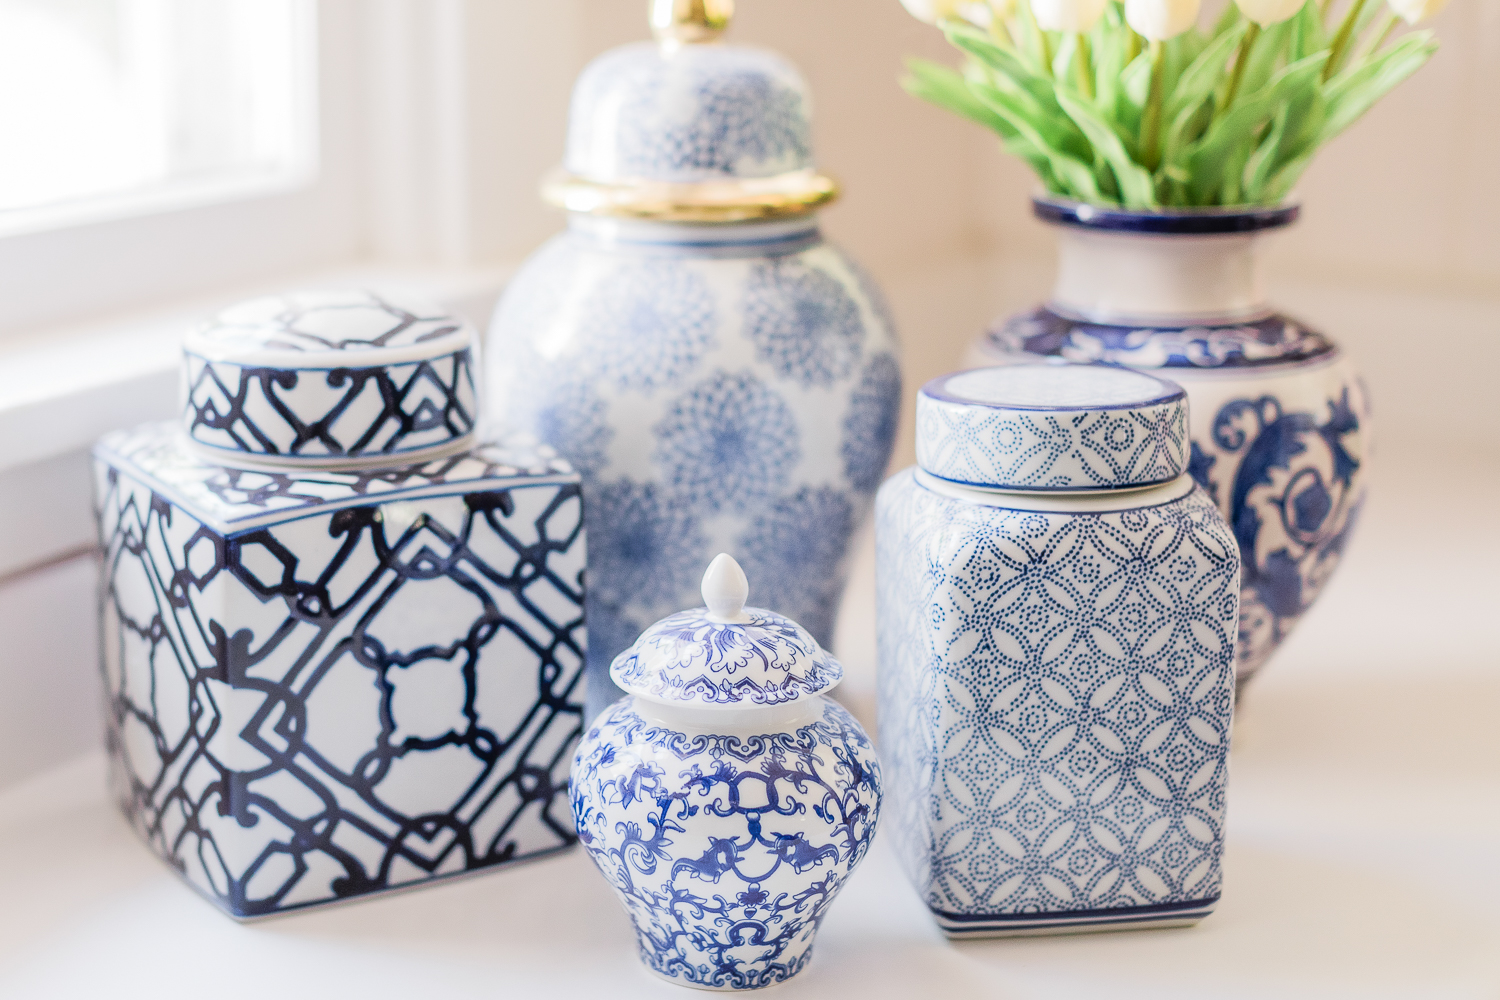 Amazon Home Decor Finds: Blue and White Ginger Jars under $100 by popular southern lifestyle blogger Stephanie Ziajka on Diary of a Debutante, blue and white ceramic vase, blue and white ceramics, blue and white porcelain ginger jars, large ginger jars, small ginger jars, how to decorate with ginger jars, ginger jar vase with white tulips